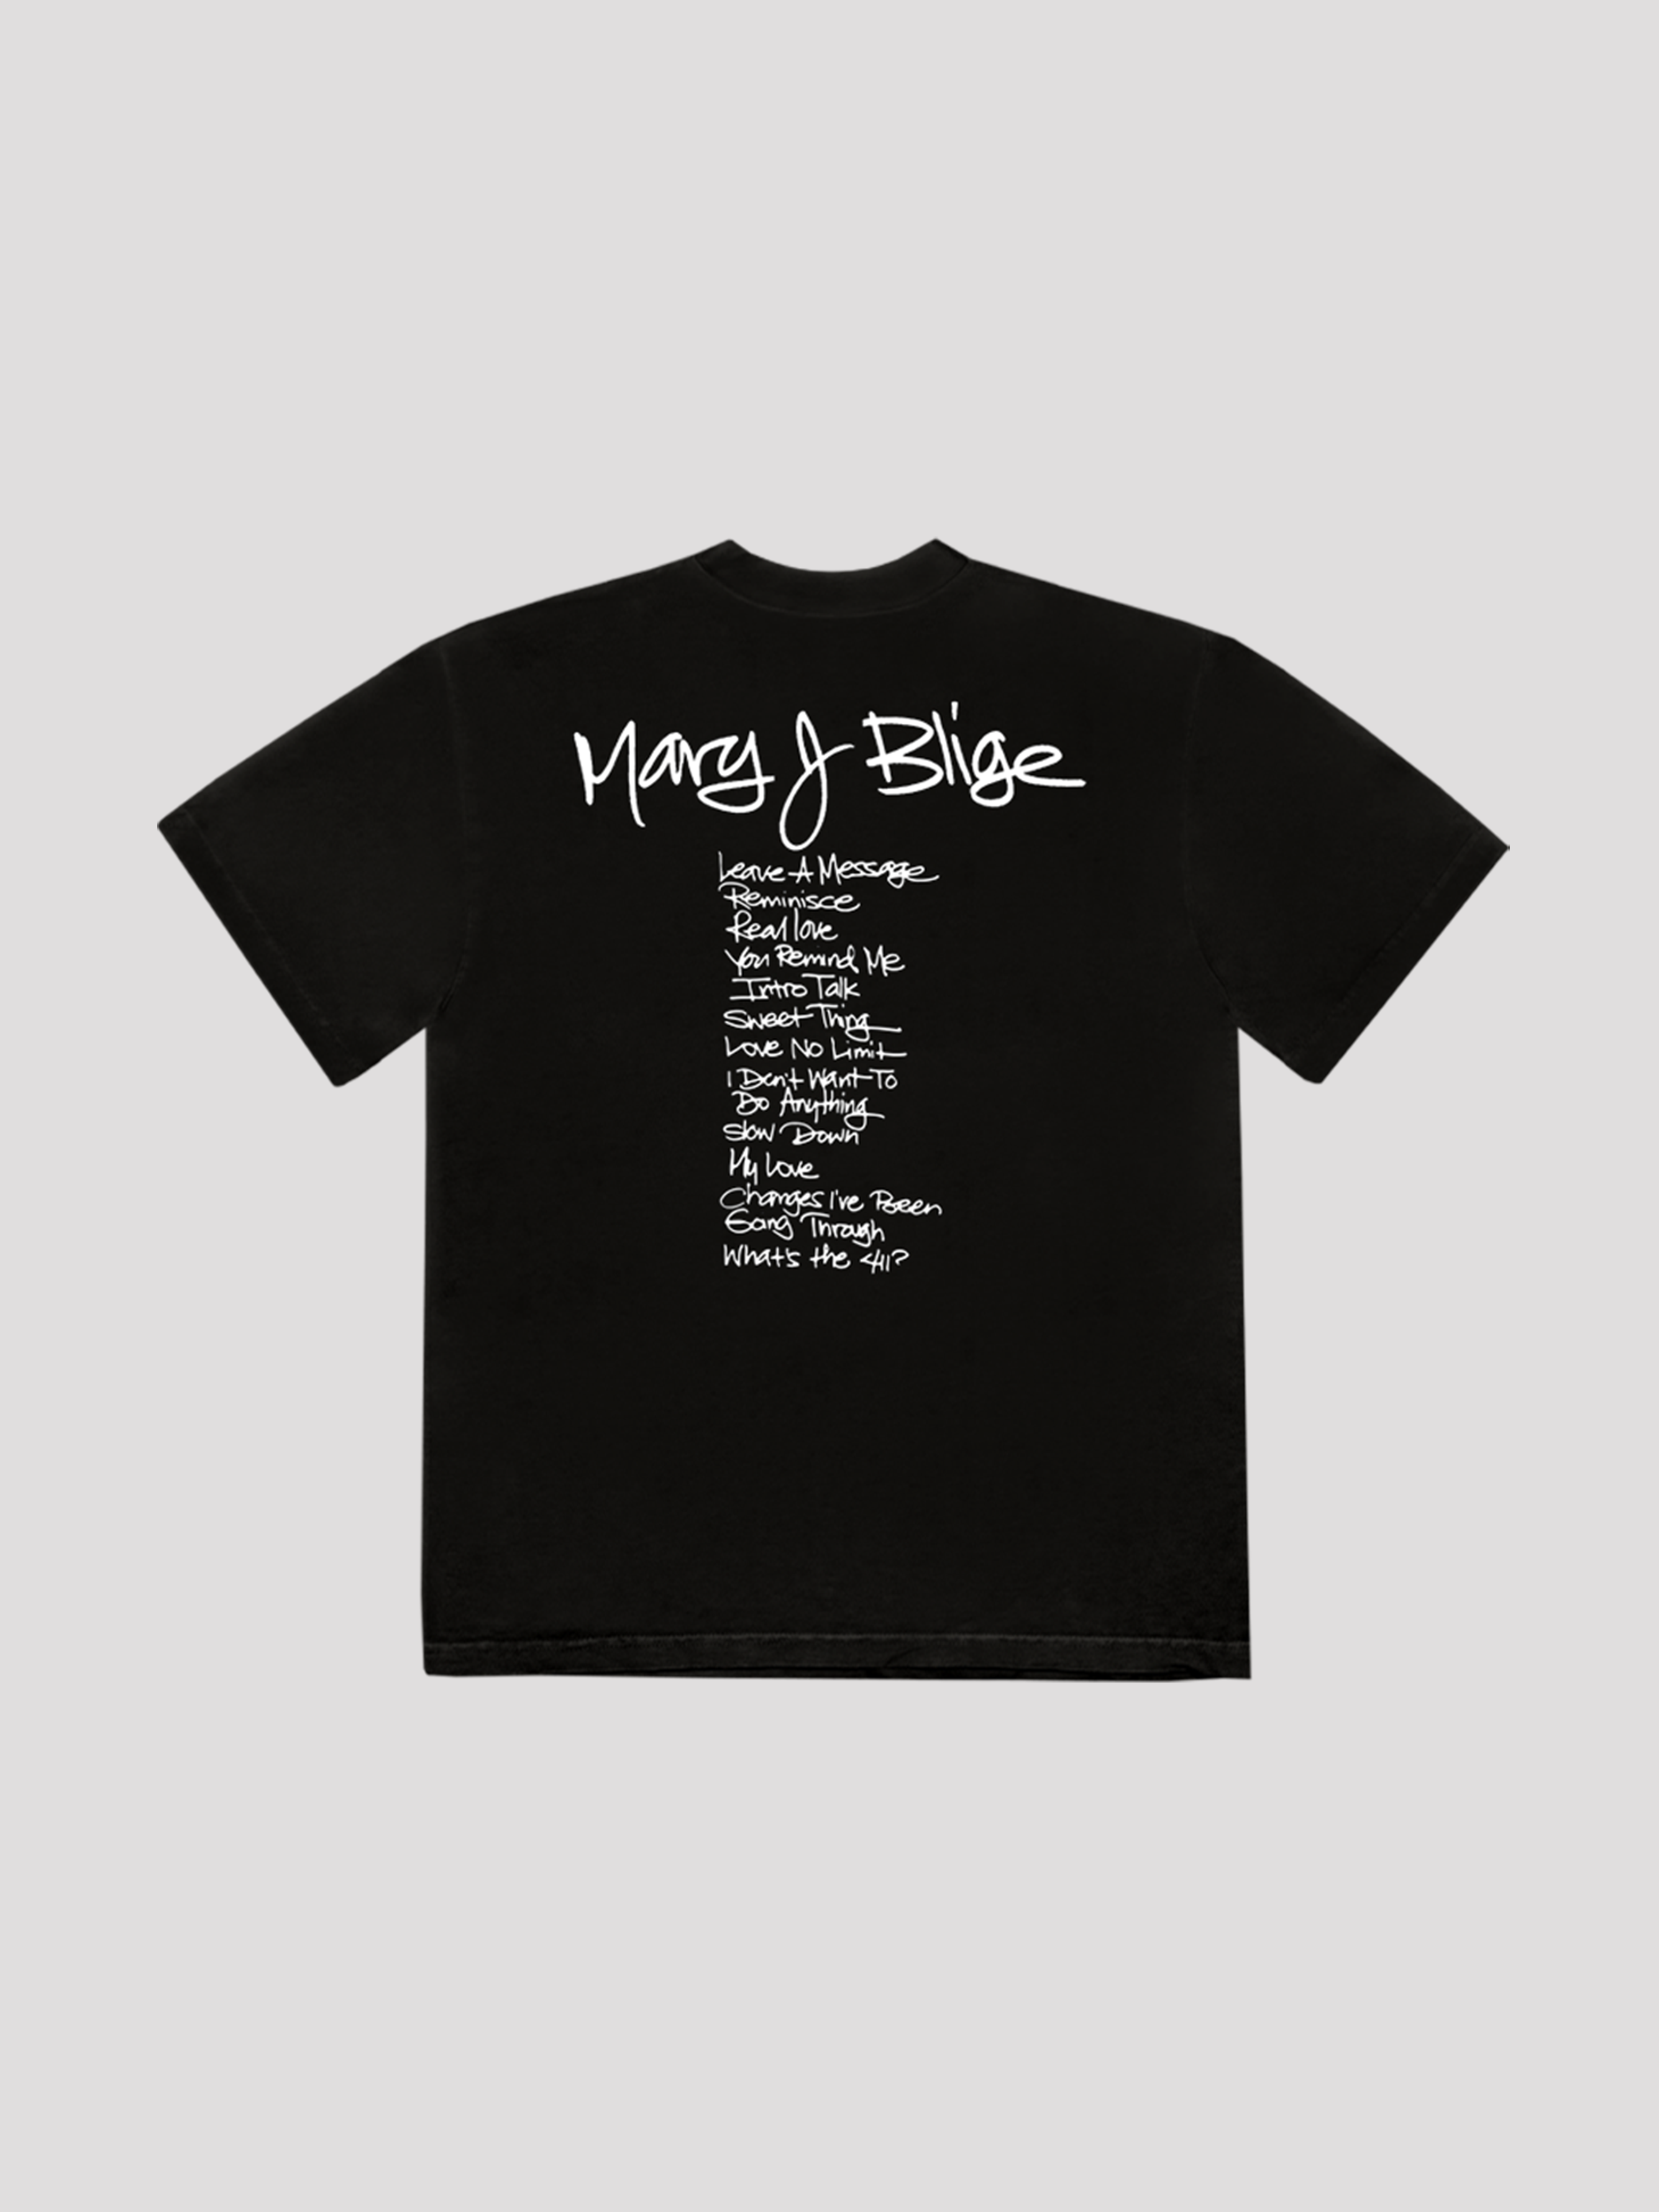 What’s The 411? Tracklist T-Shirt - Mary J. Blige Official Store